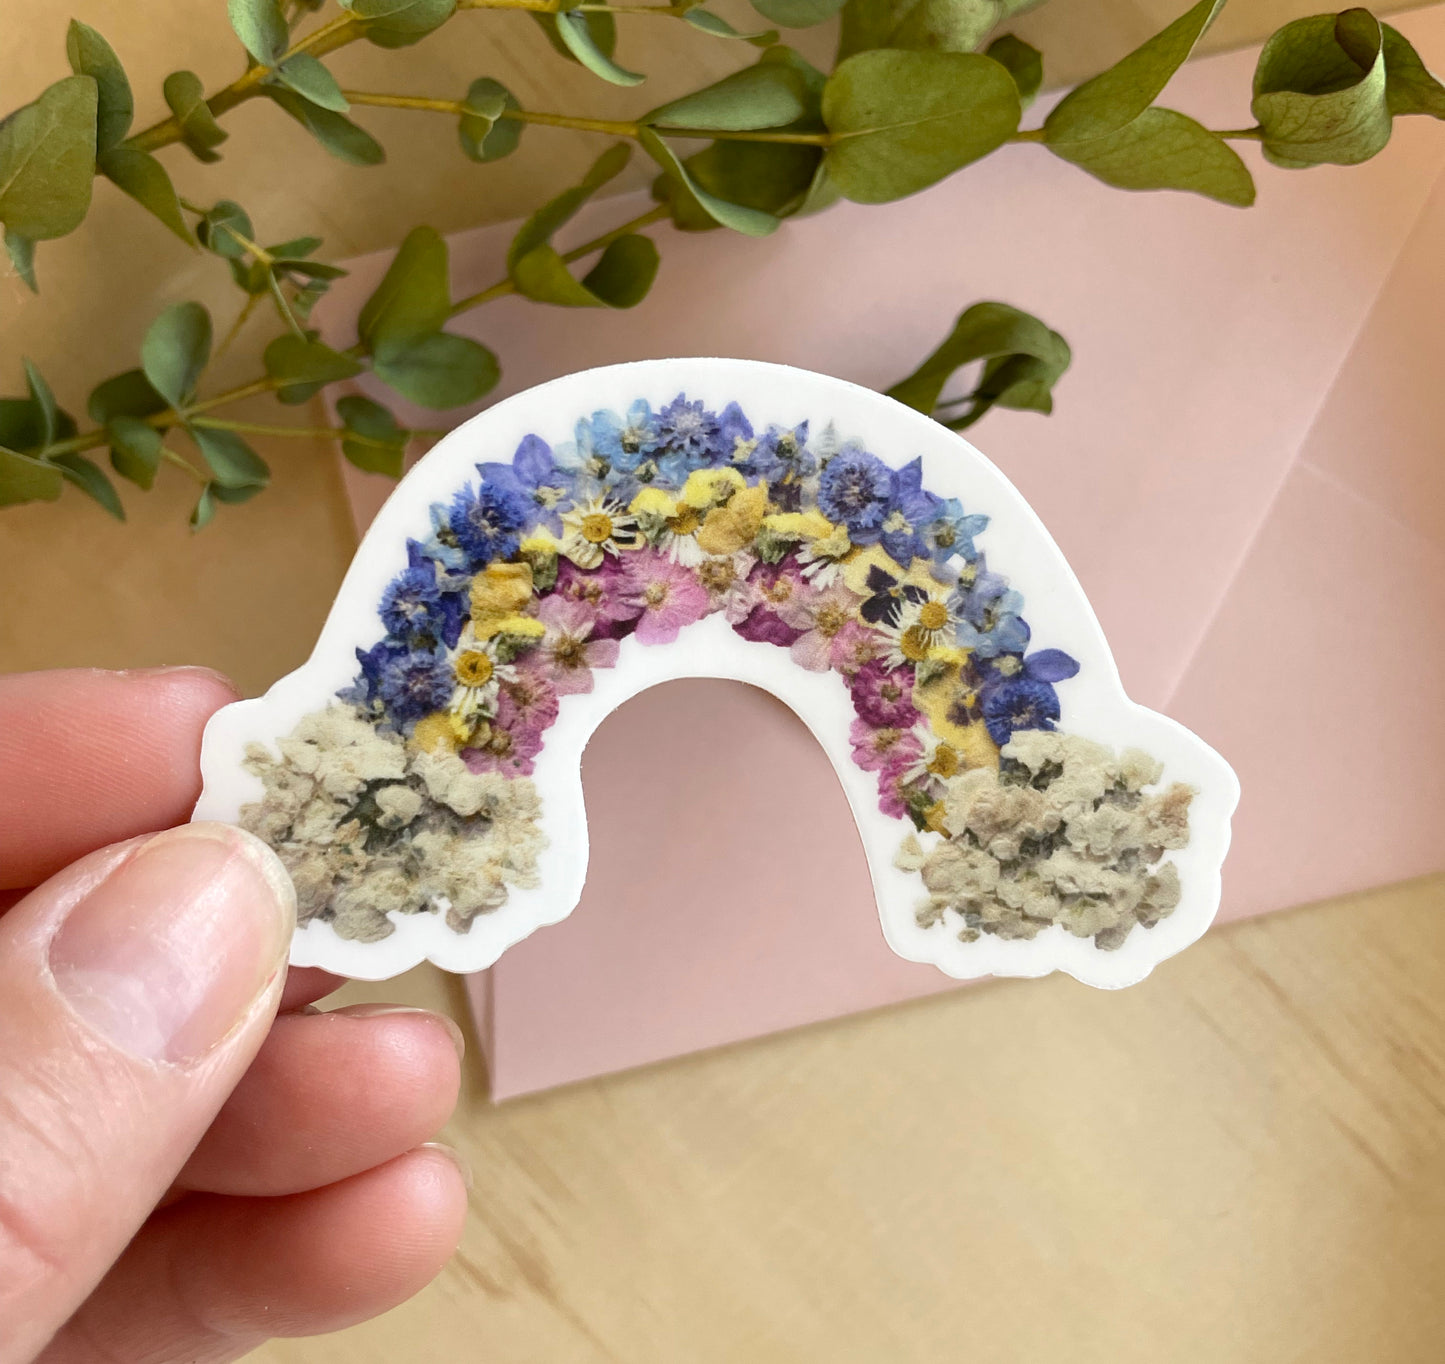 sticker of rainbow made from dried pressed flowers in the shape of a rainbow. 